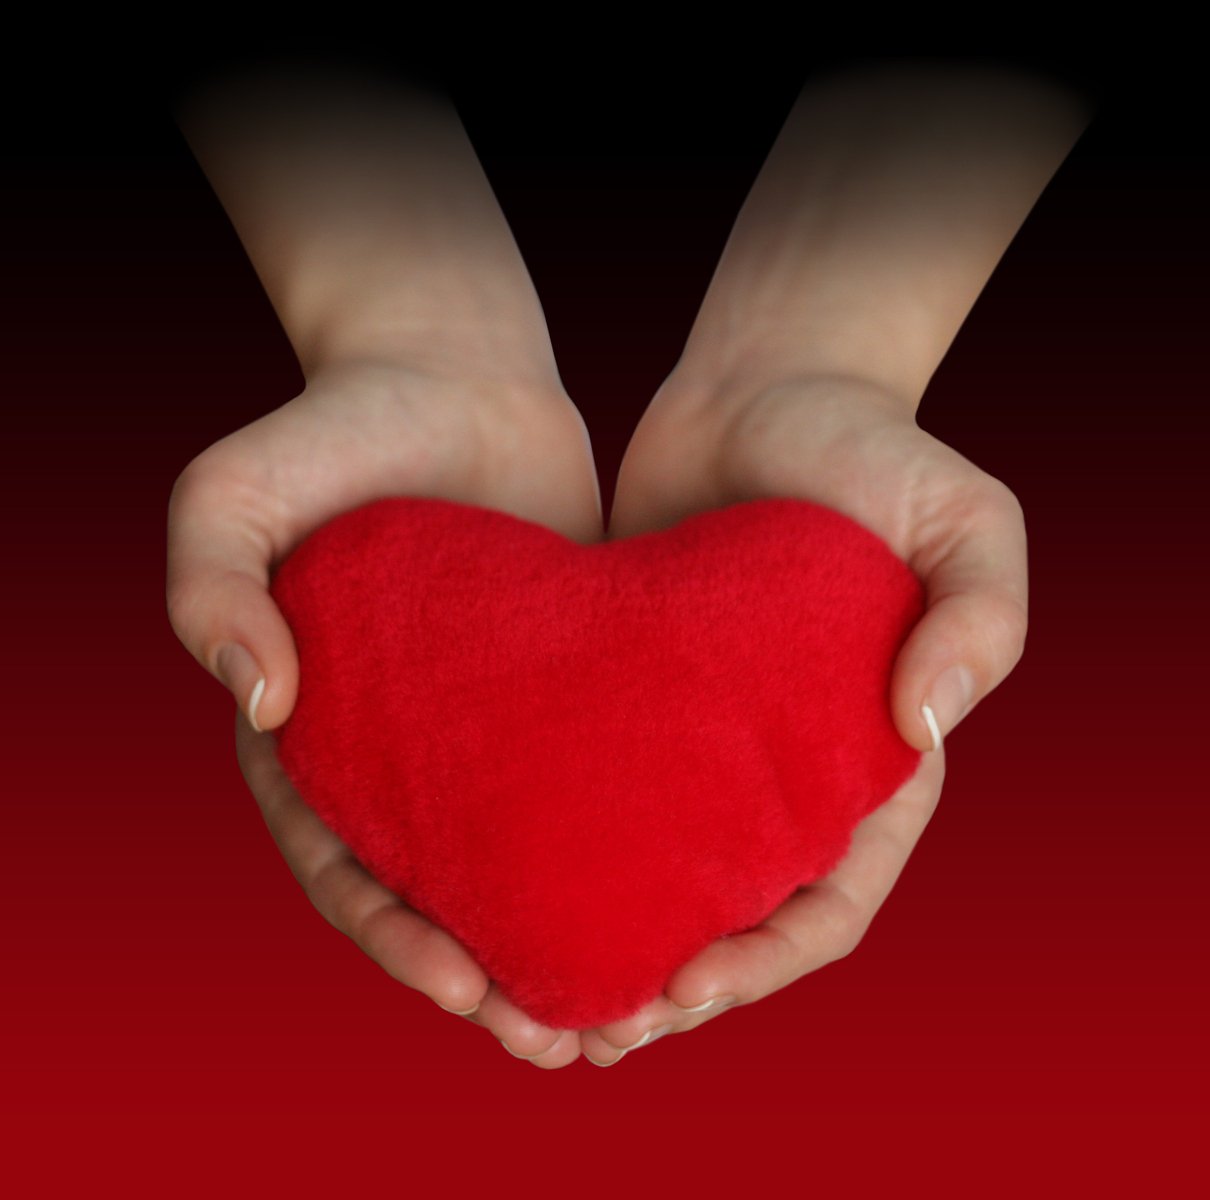 hands are holding a heart shape pillow over a red backdrop